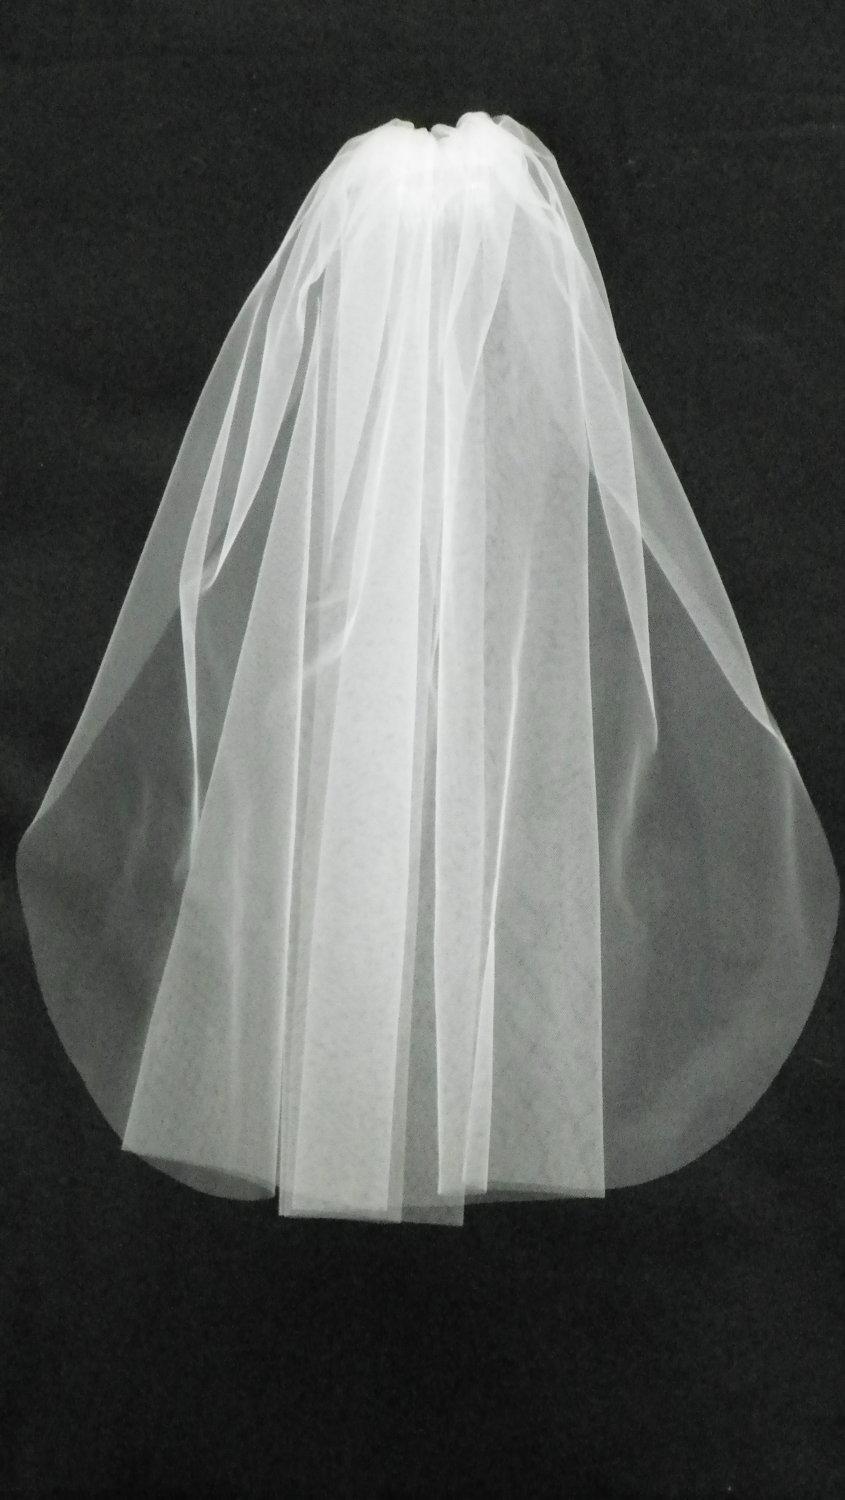 Mariage - Communion Veil Baptism 25 inches long, White, Ivory,Super deal.